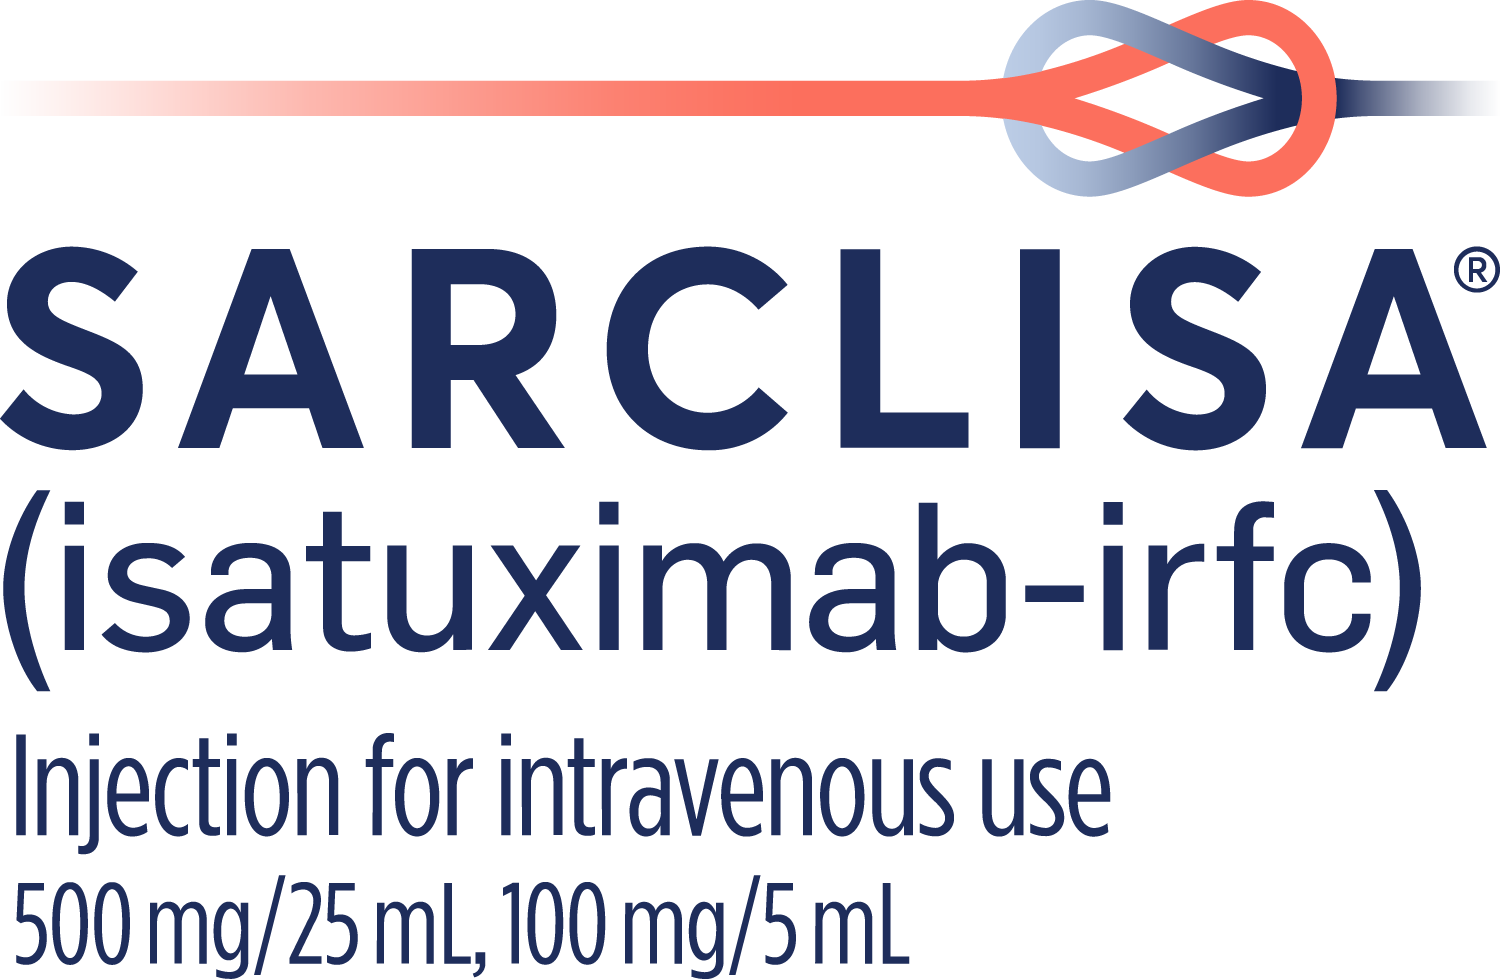 SARCLISA® (isatuximab-irfc) Injection for
                                                                            intravenous use | 500 mg/25 mL, 100 mg/5 mL